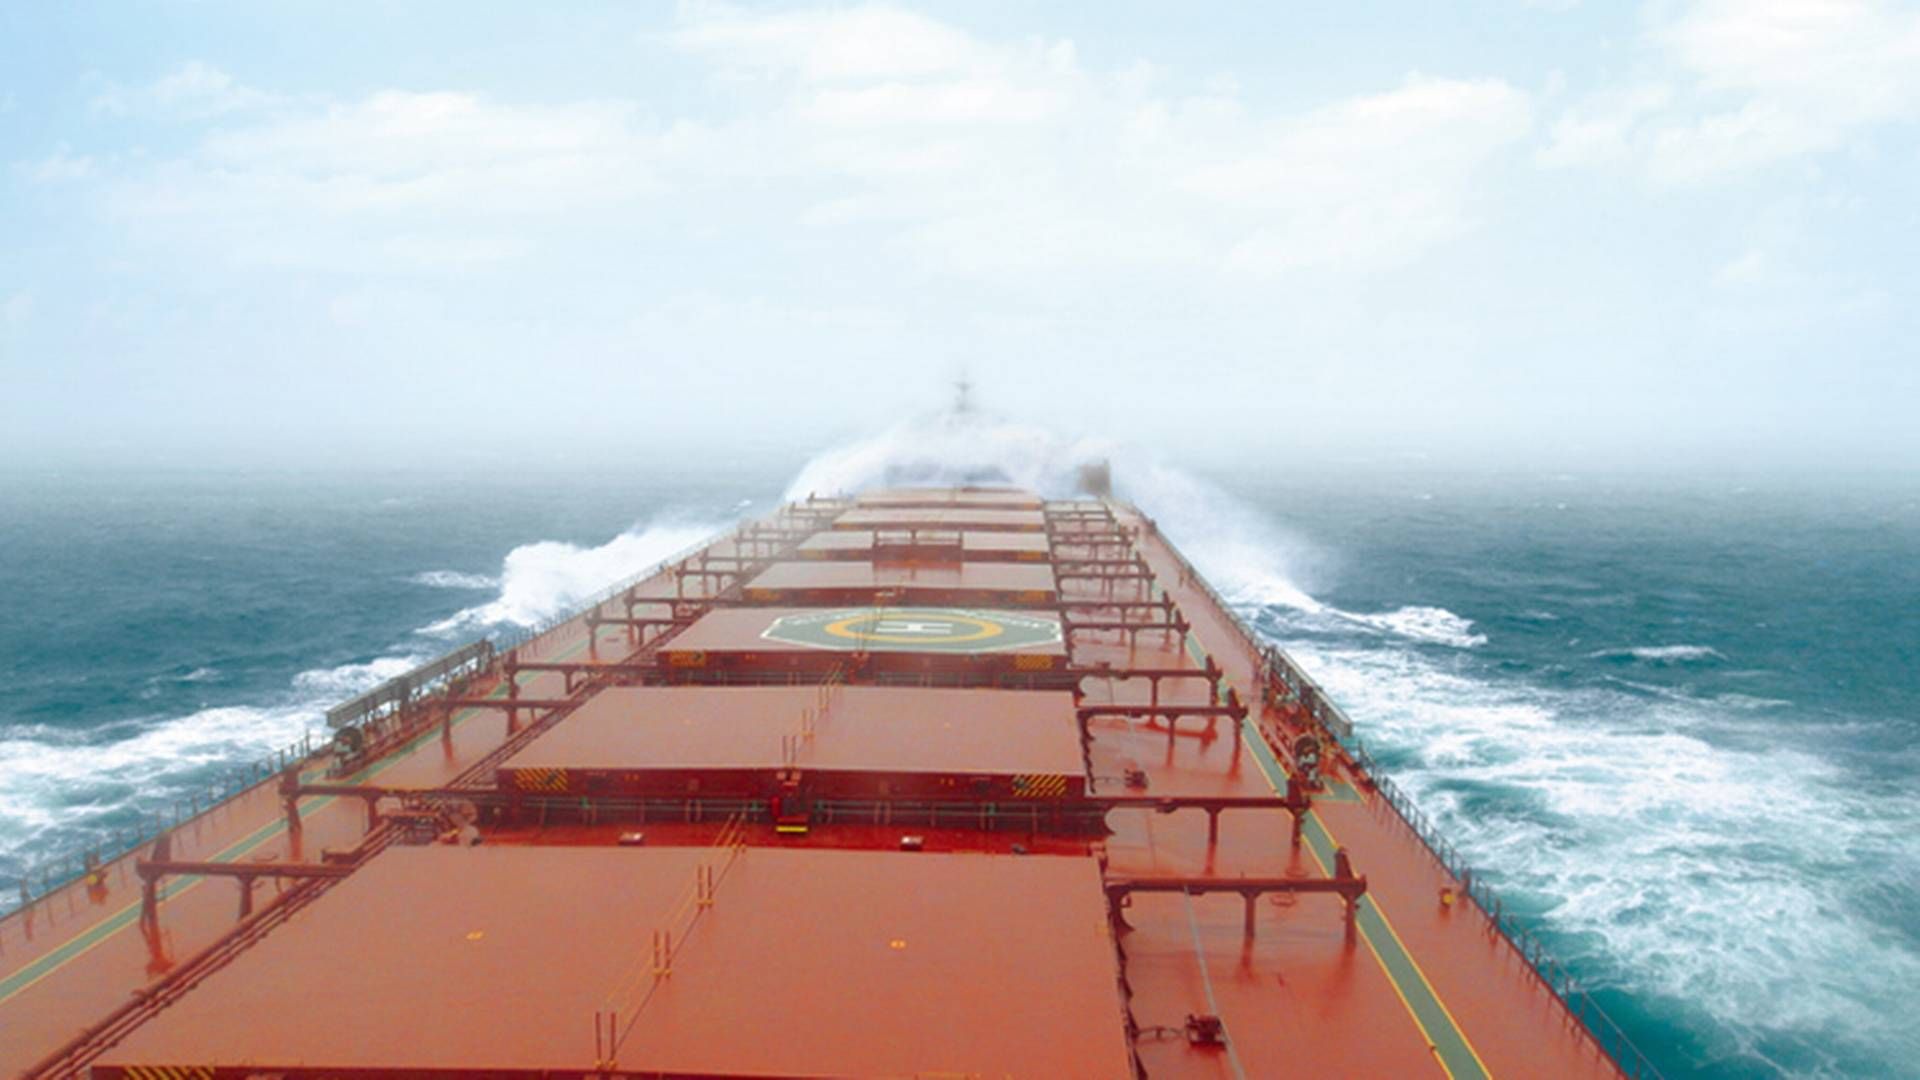 HMM, together with partners, will acquire the dry bulk carrier Polaris Shipping. | Photo: Pr / Hmm